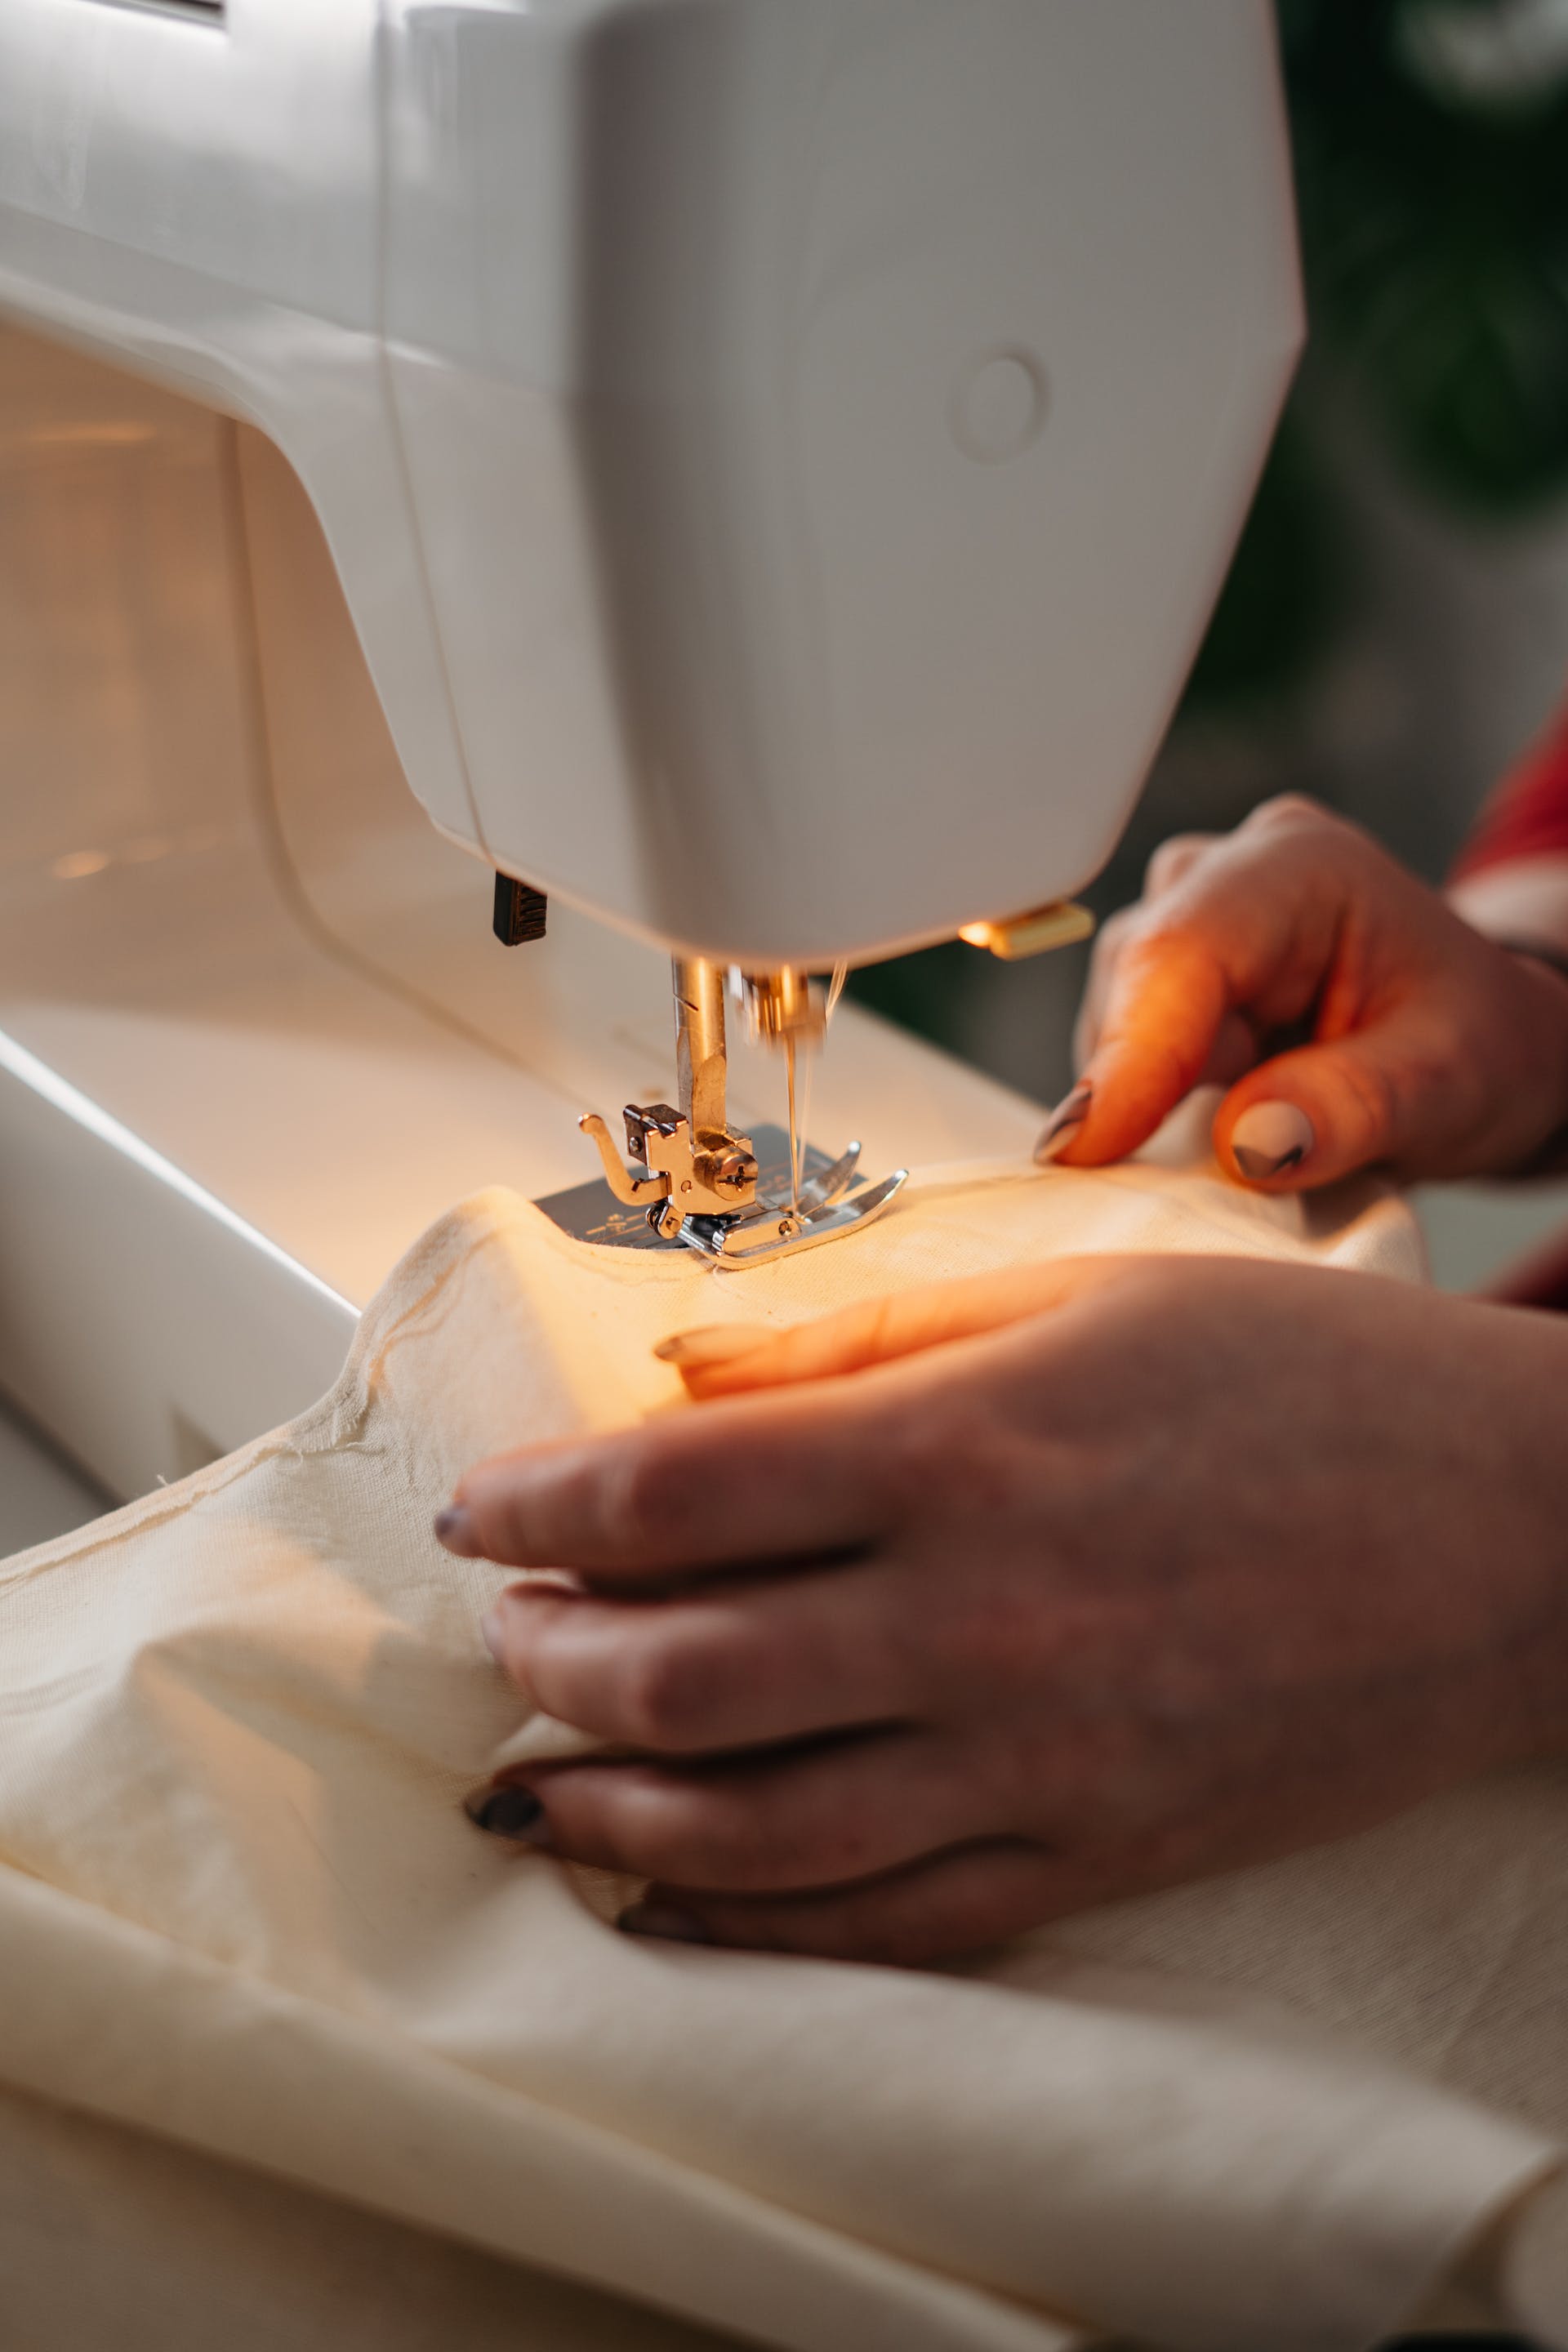 Person using a sewing machine | Source: Pexels